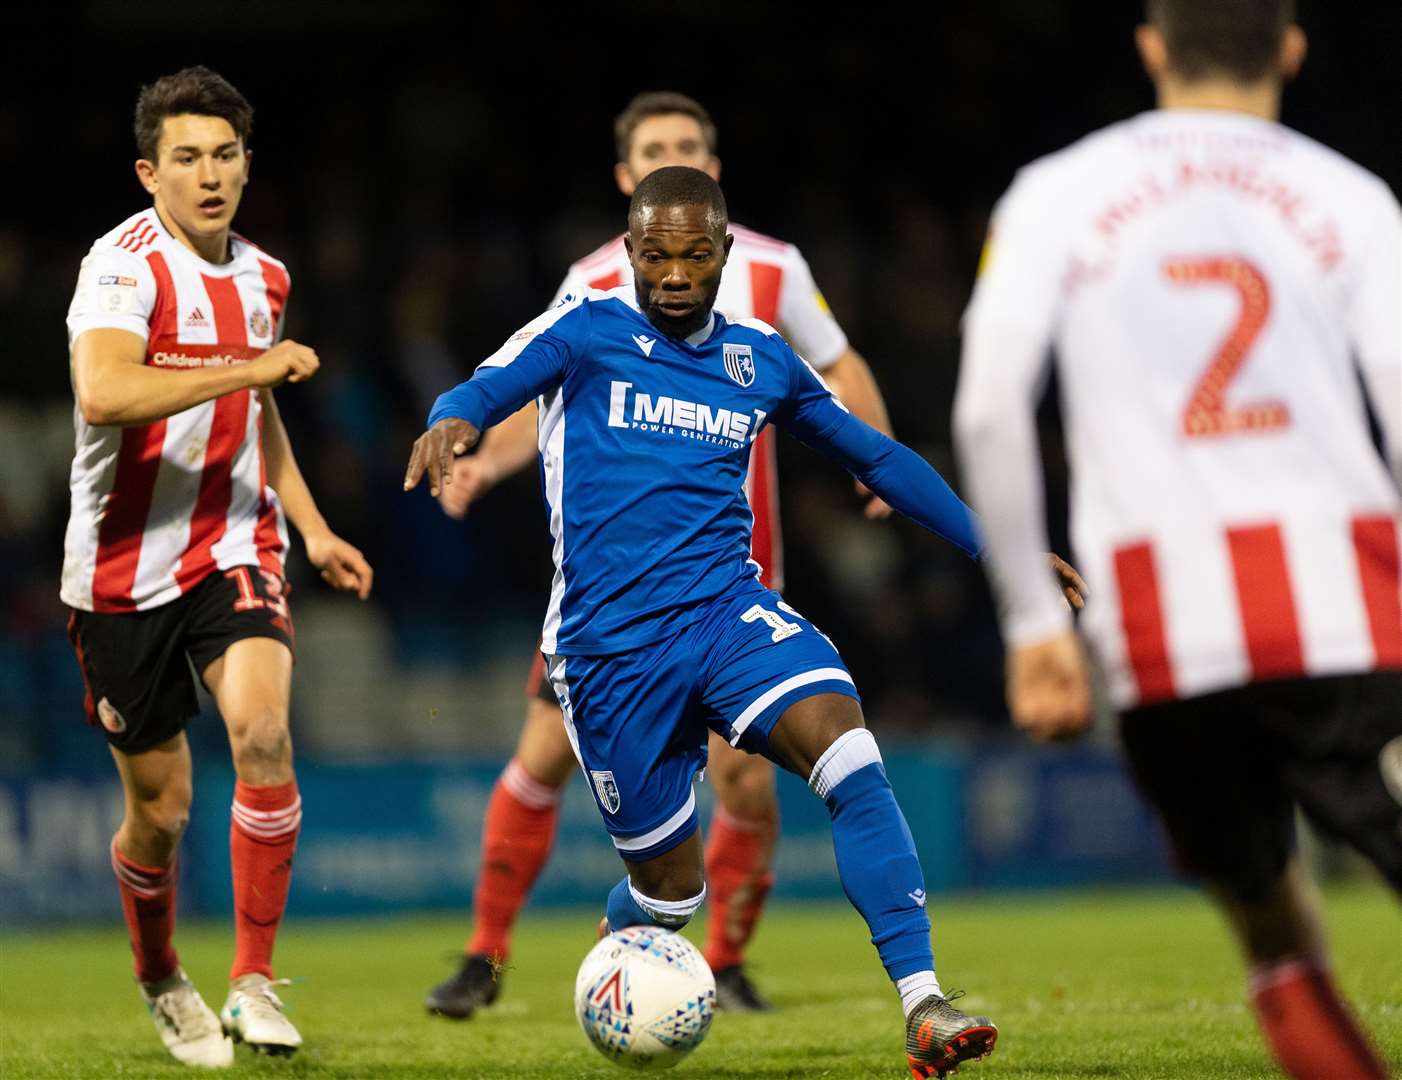 Mark Marshall had a six month spell with the Gills under Steve Evans last season